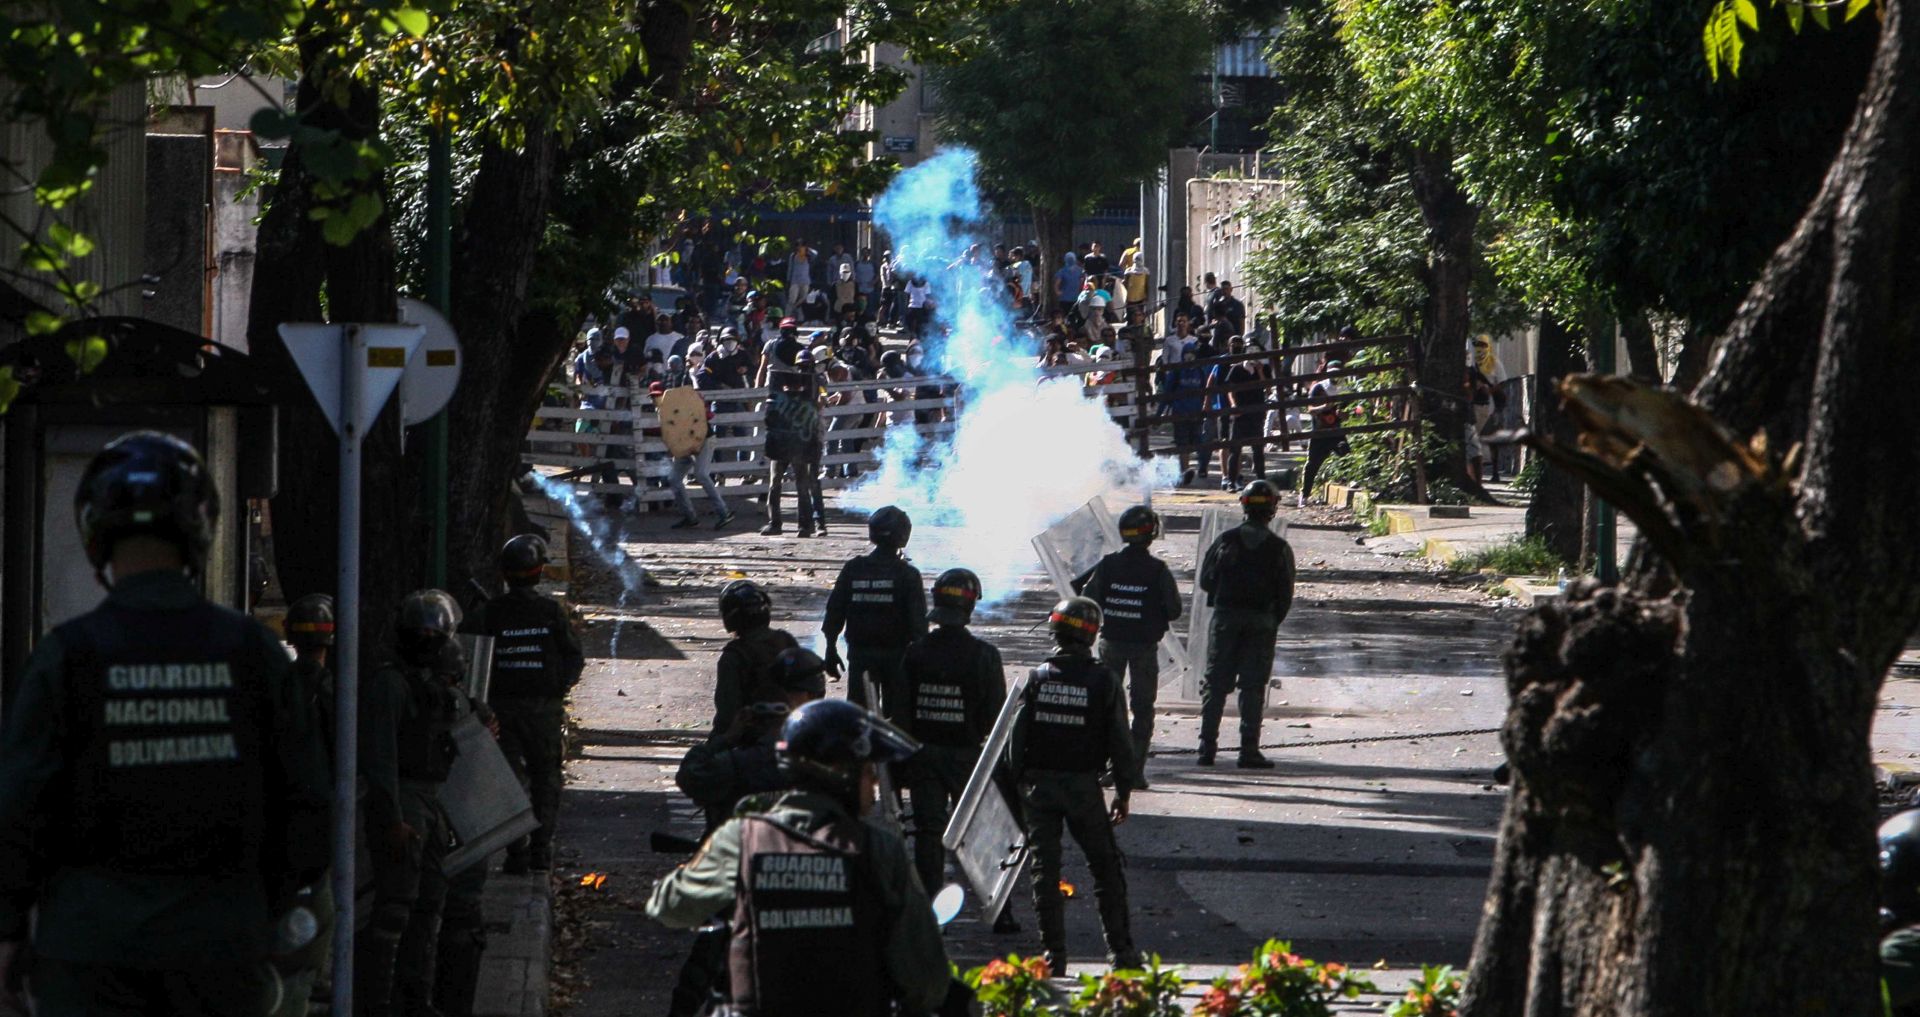 epa06066617 Members of the Bolivarian National Guard face opposition protestors during a demonstration against the National Constituent Assembly called by President Nicolas Maduro, in Caracas, Venezuela, 04 July 2017.  The so called 'national blocking against the dictatorship started at 12.00 local time and will extend for six hours, becoming the longest call by the Democratic Unity Roundtable since the start of the anti-government protests three months ago.  EPA/CRISTIAN HERNÁNDEZ